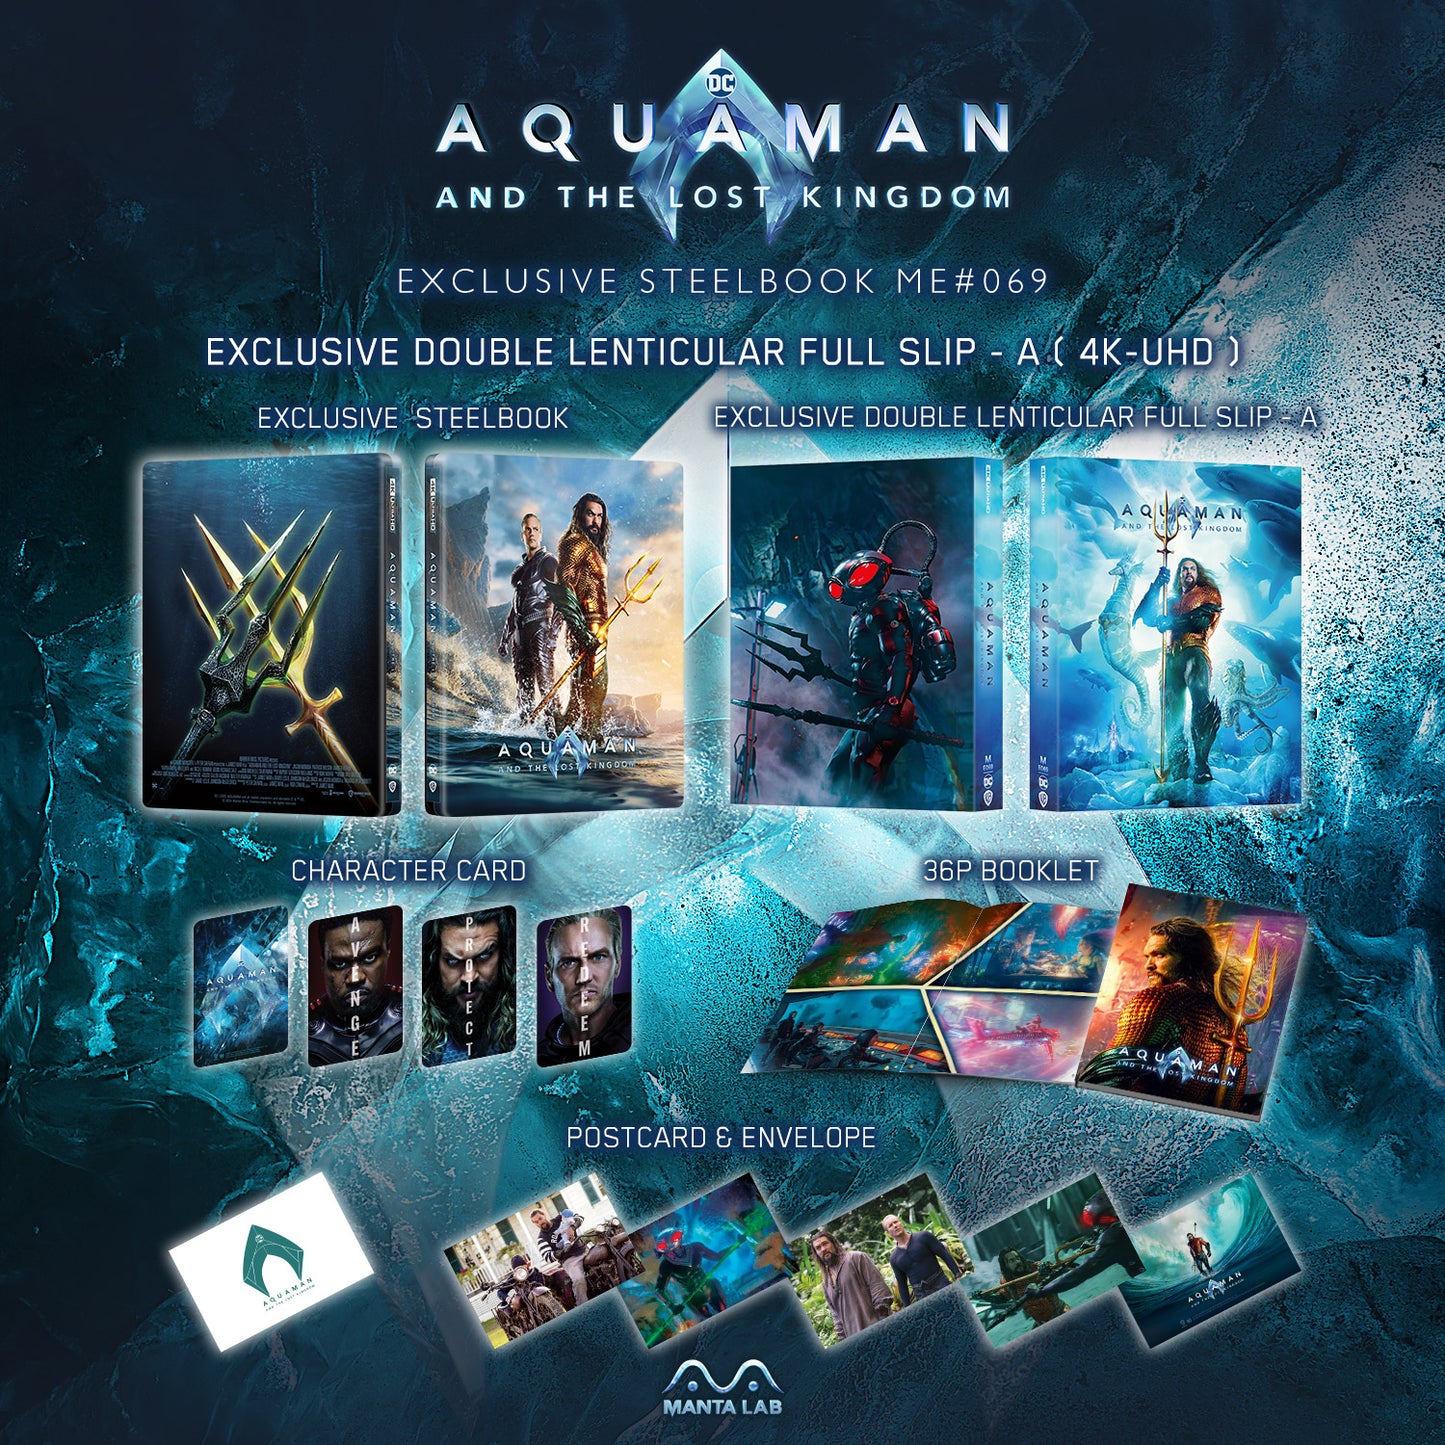 Aquaman and The Lost Kingdom 4K Blu-ray Steelbook Manta Lab Exclusive ME#69 Double Lenticular Full Slip A